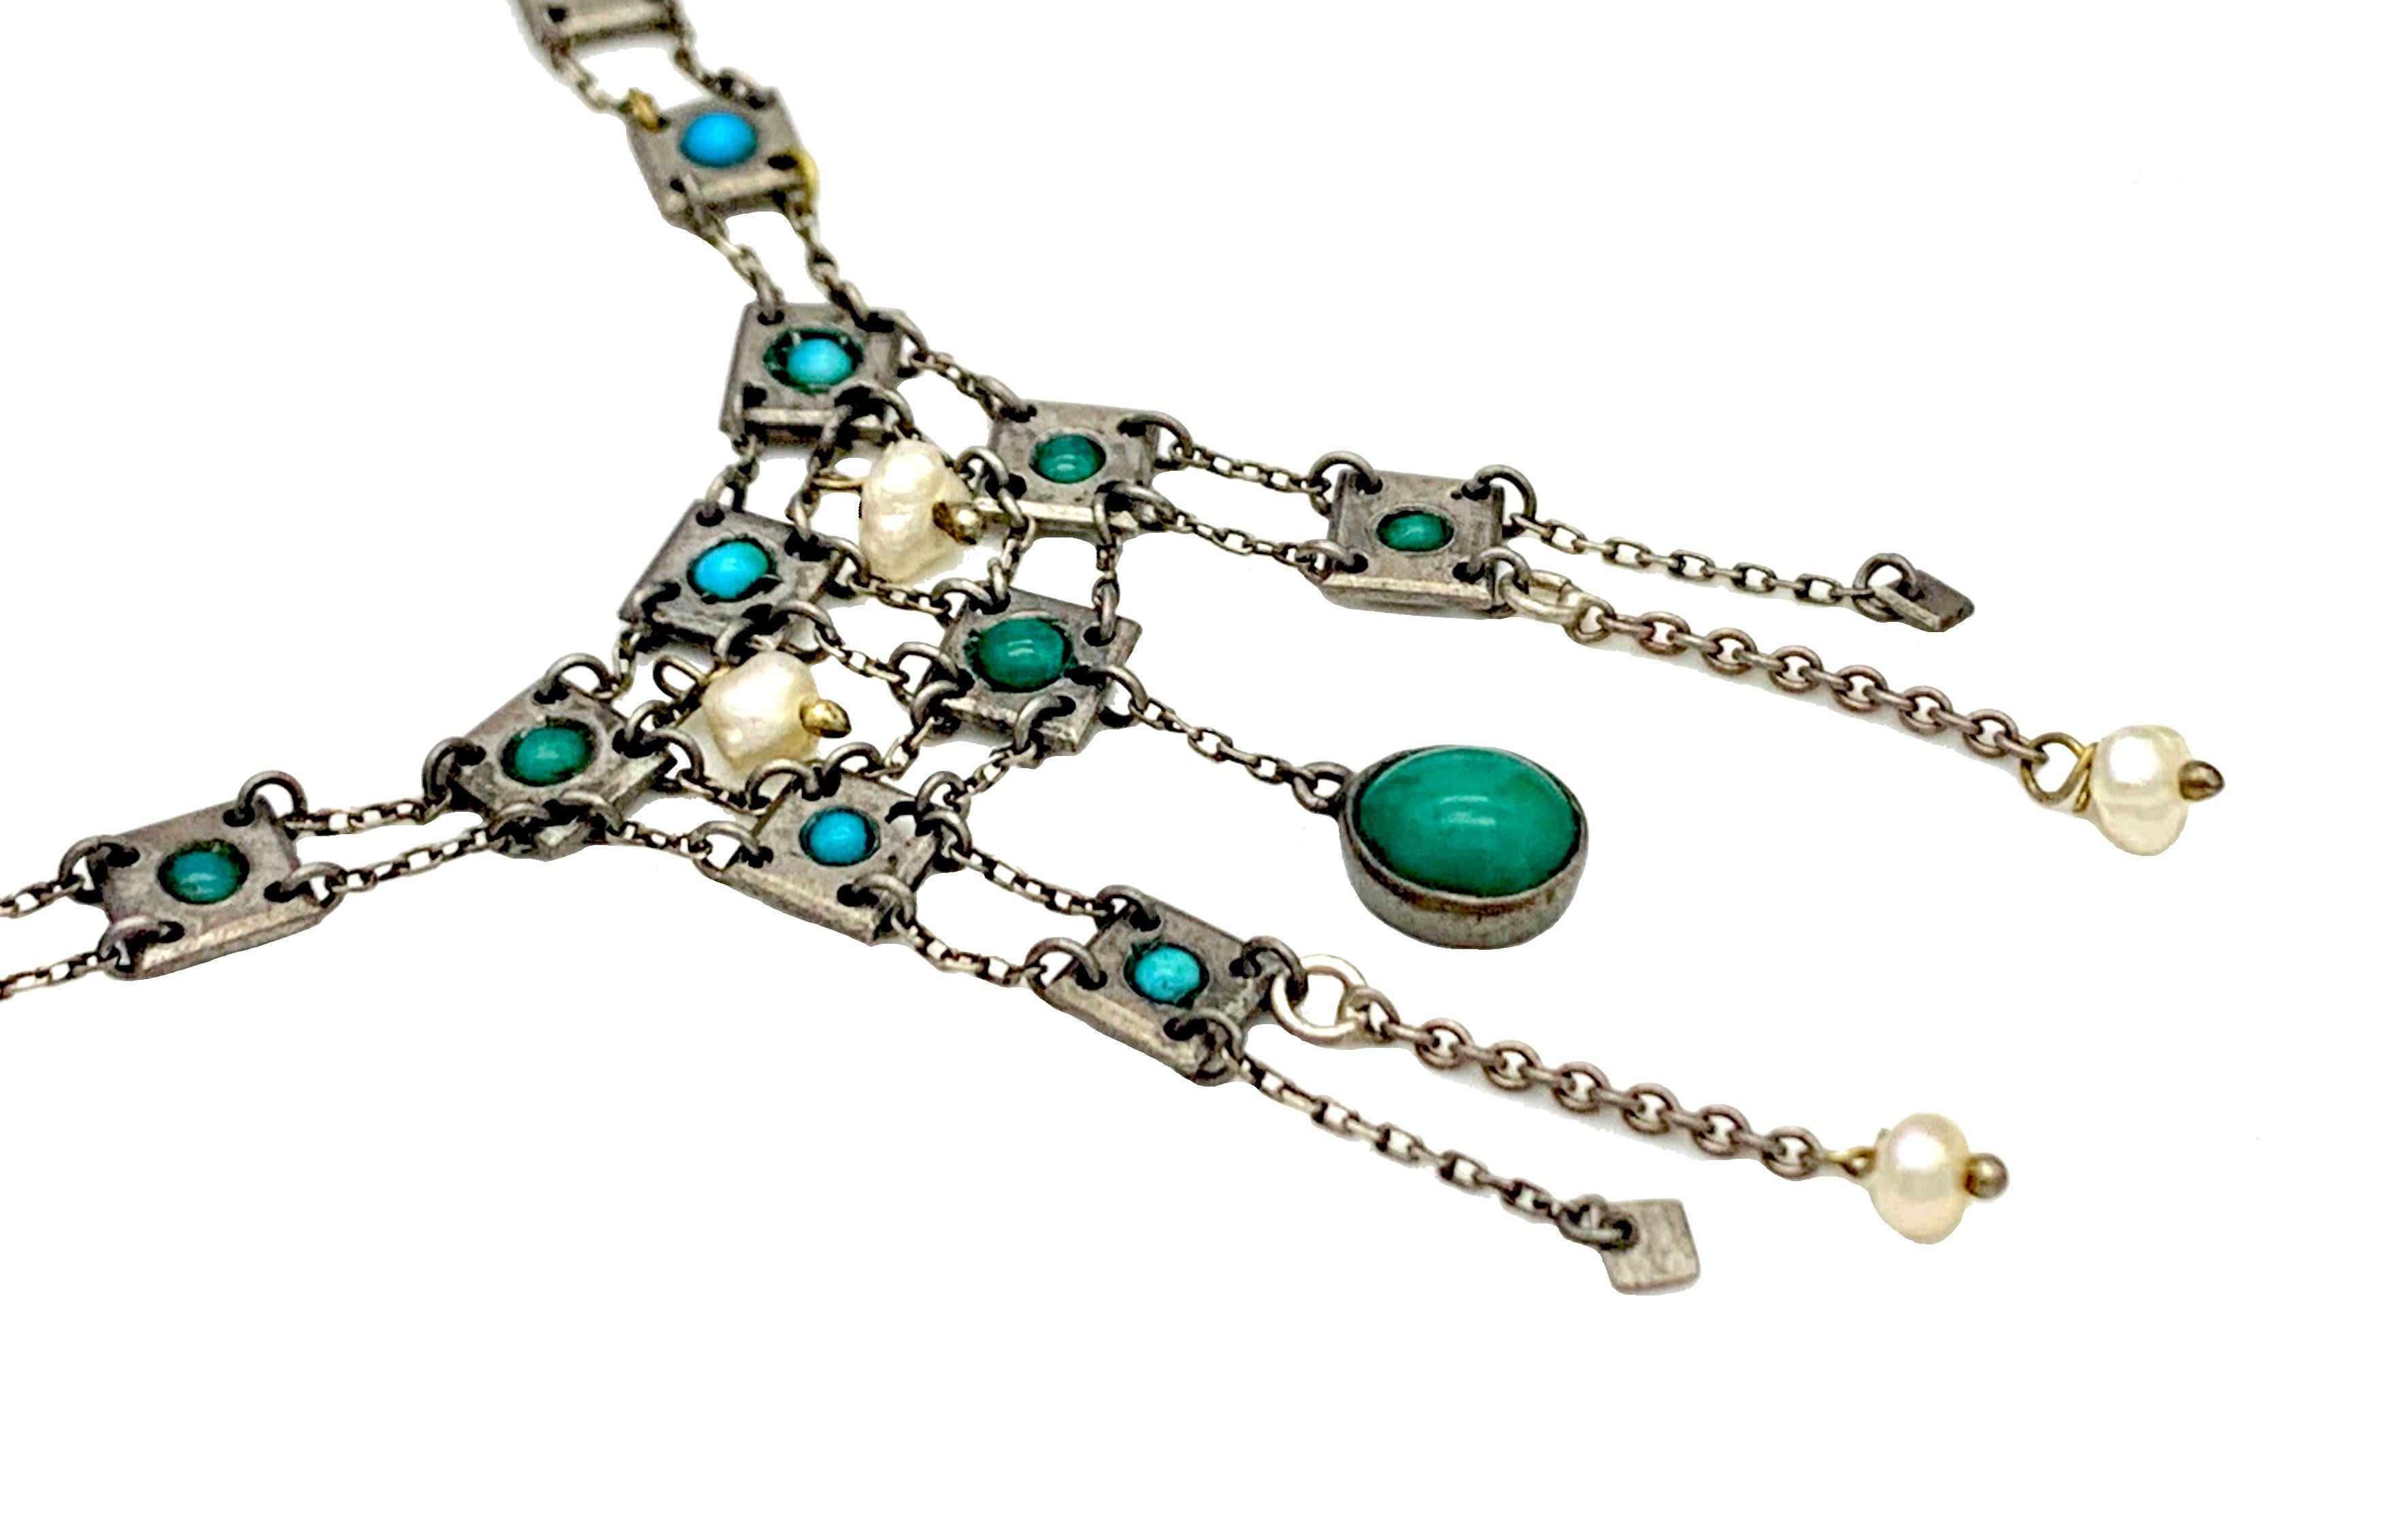 This delicate flexible link dangling necklace was executed in the secessionist style around 1905. It is most likely of European origin, however, an attribution to a specific country is not easy.
It is made out of metal and set with different size